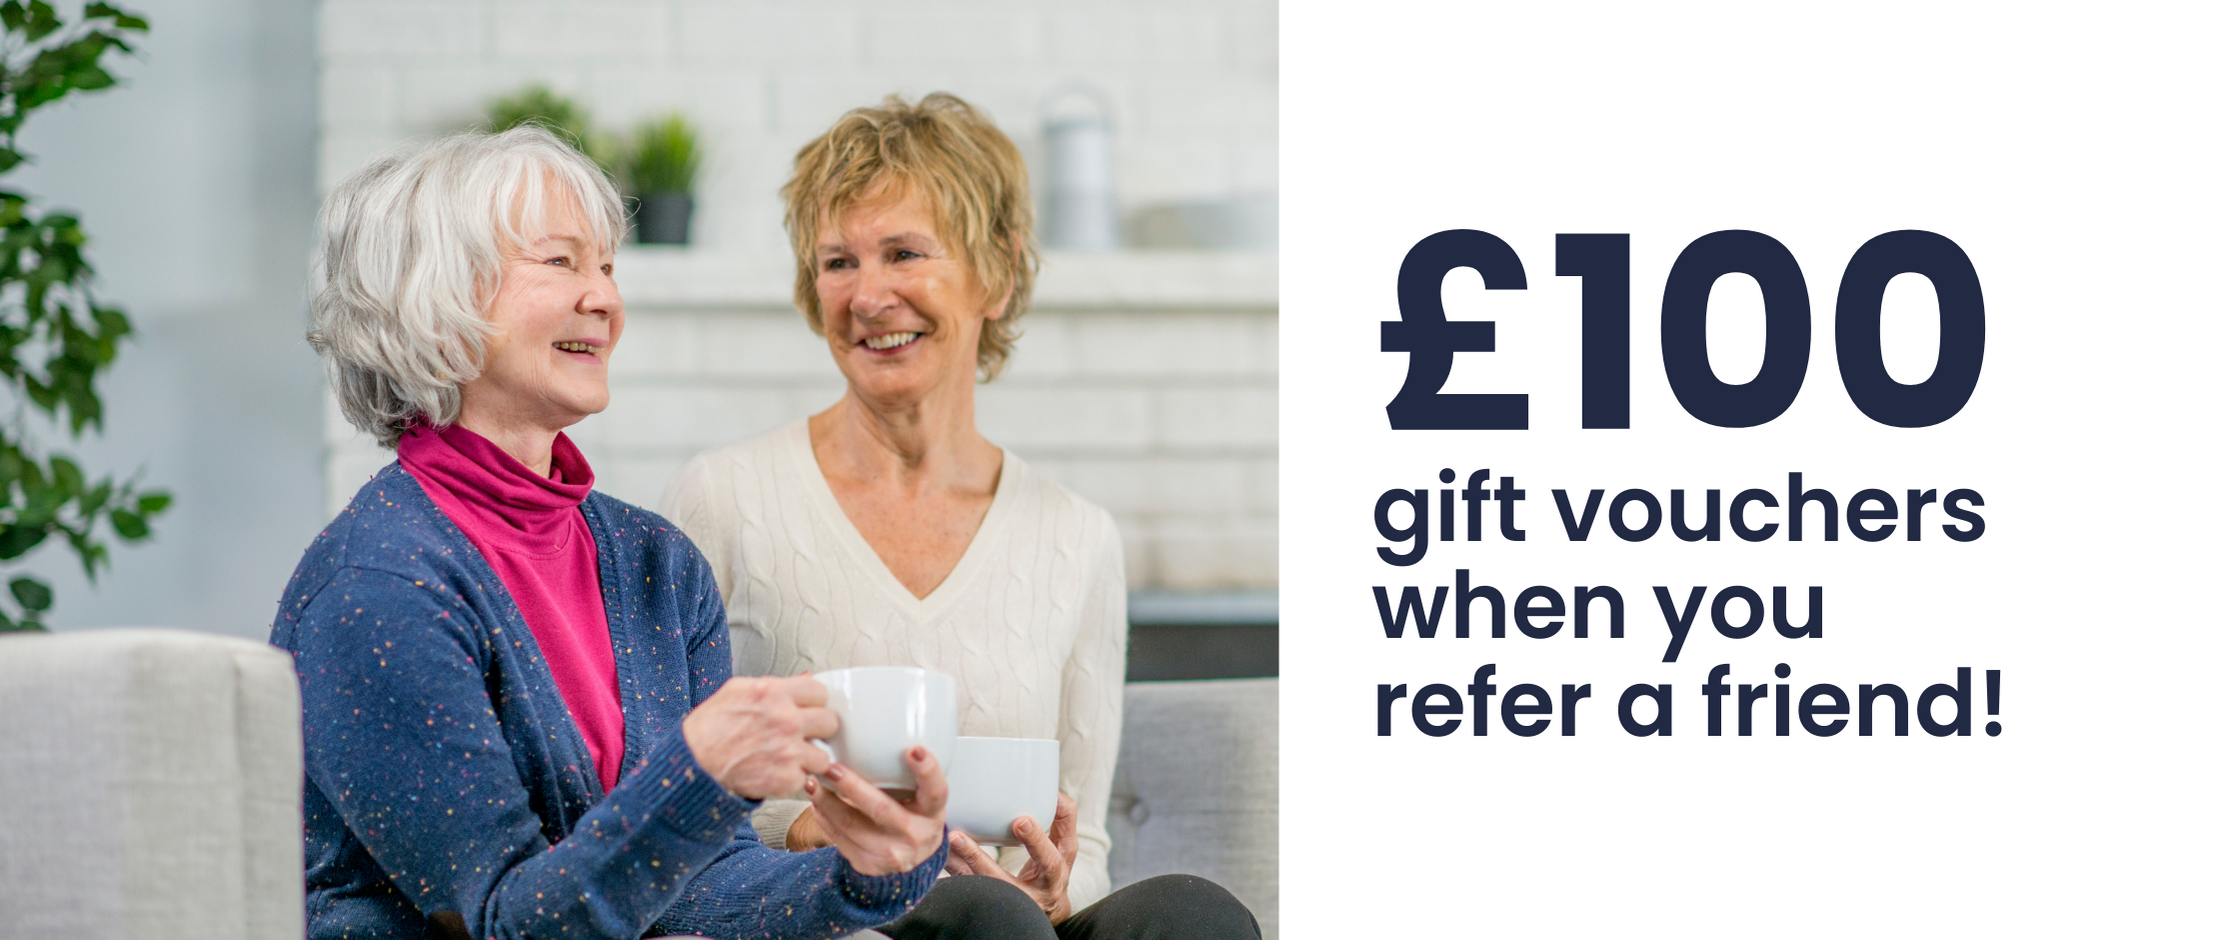 Existing customers can recommend a friend to My Future Living and receive a £100 gift voucher when they move into their new home.